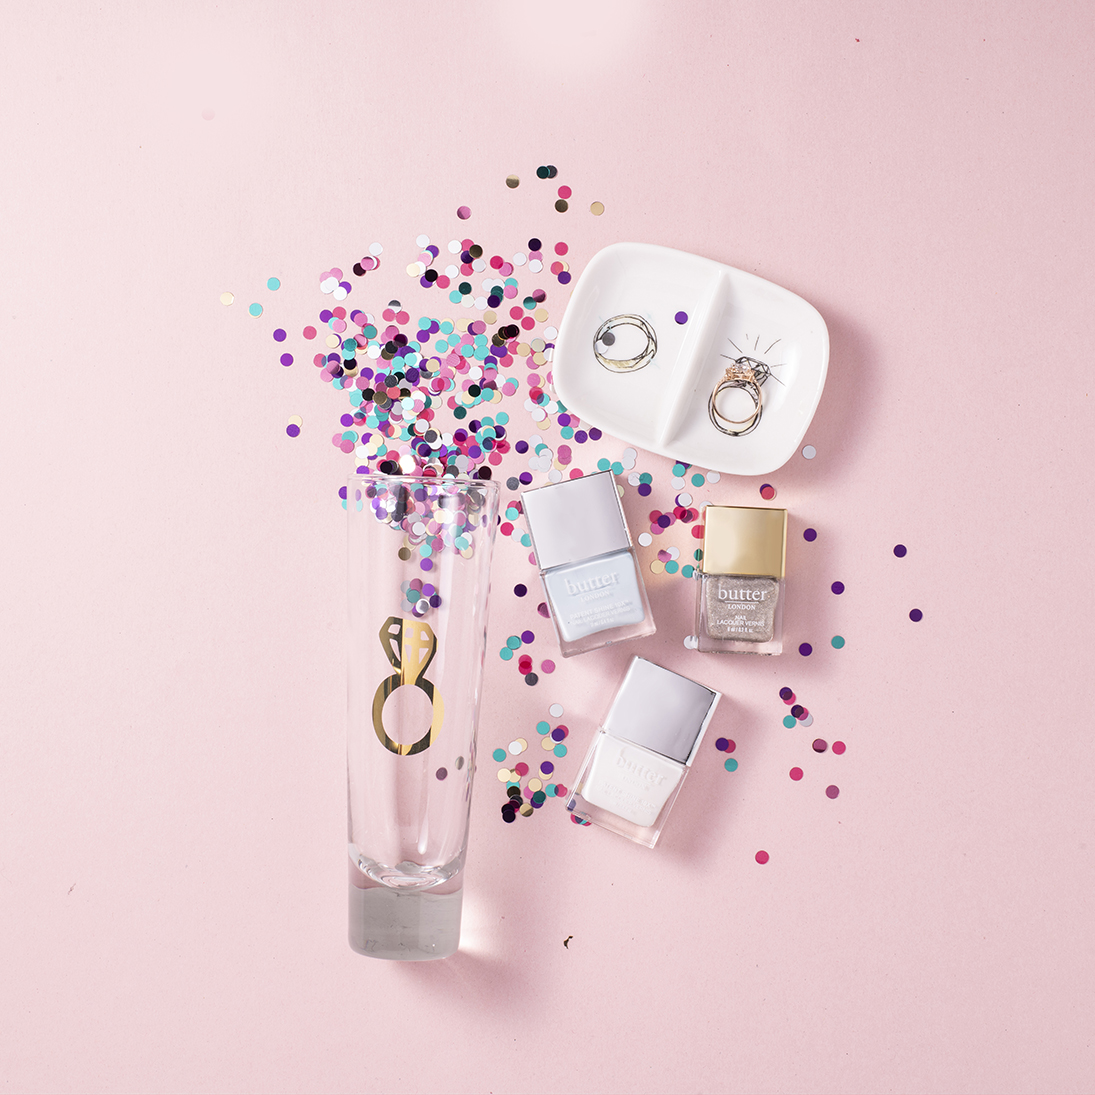 A champagne glass with confetti, a ring dish and nail polish bottles on a pink backdrop.